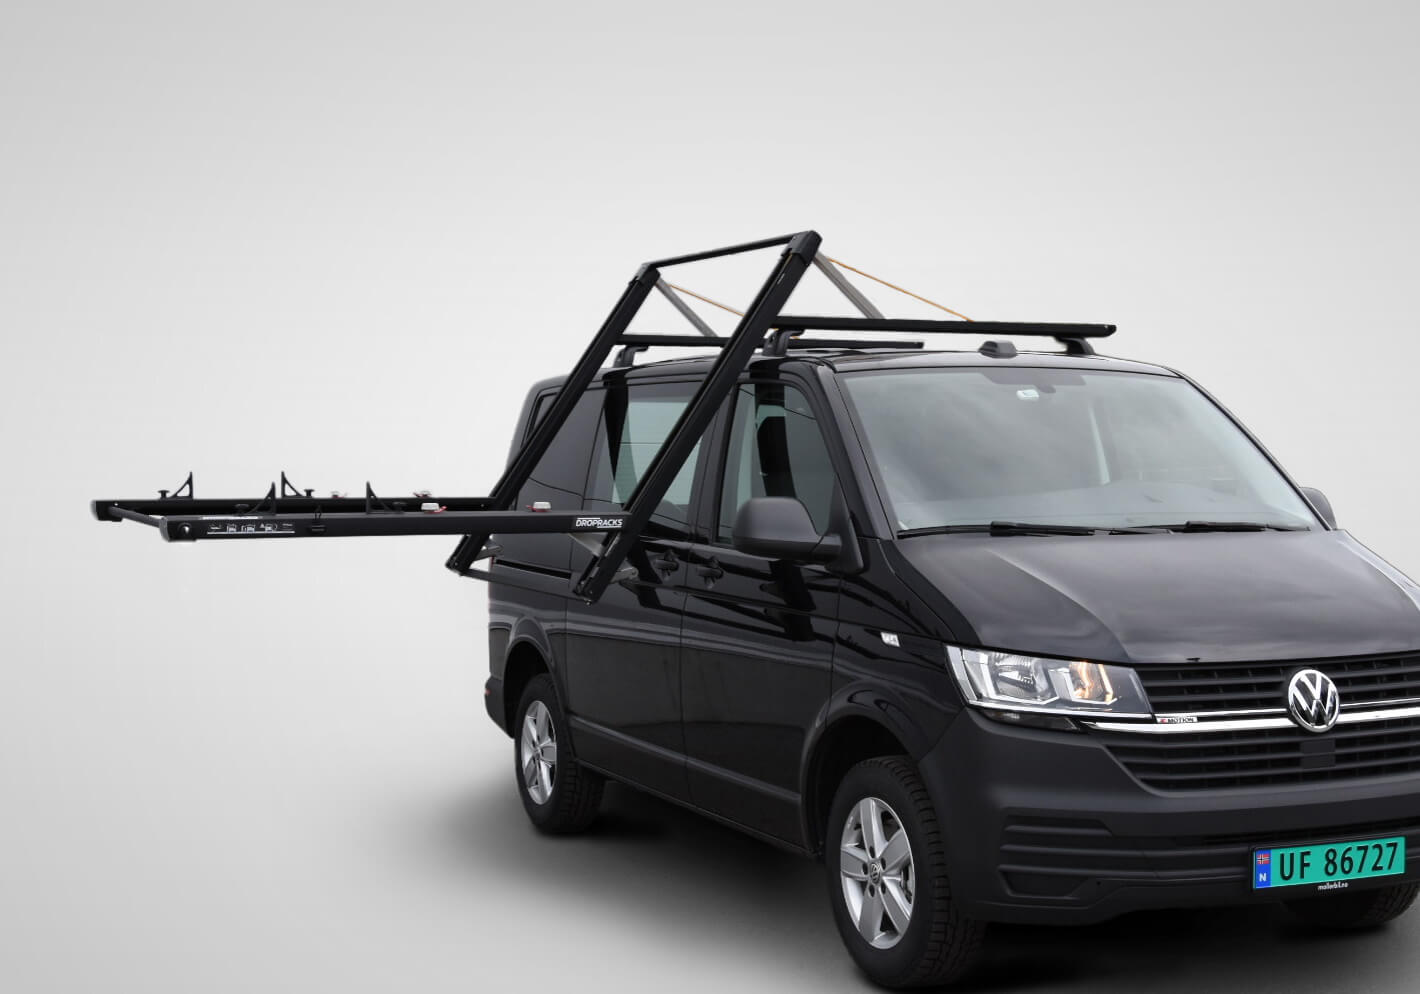 Volkswagen VW Crafter L2 (MWB) H2 (high roof) (2006 to 2017):Dropracks XL roof loading system (vehicle roof connectors at extra cost)